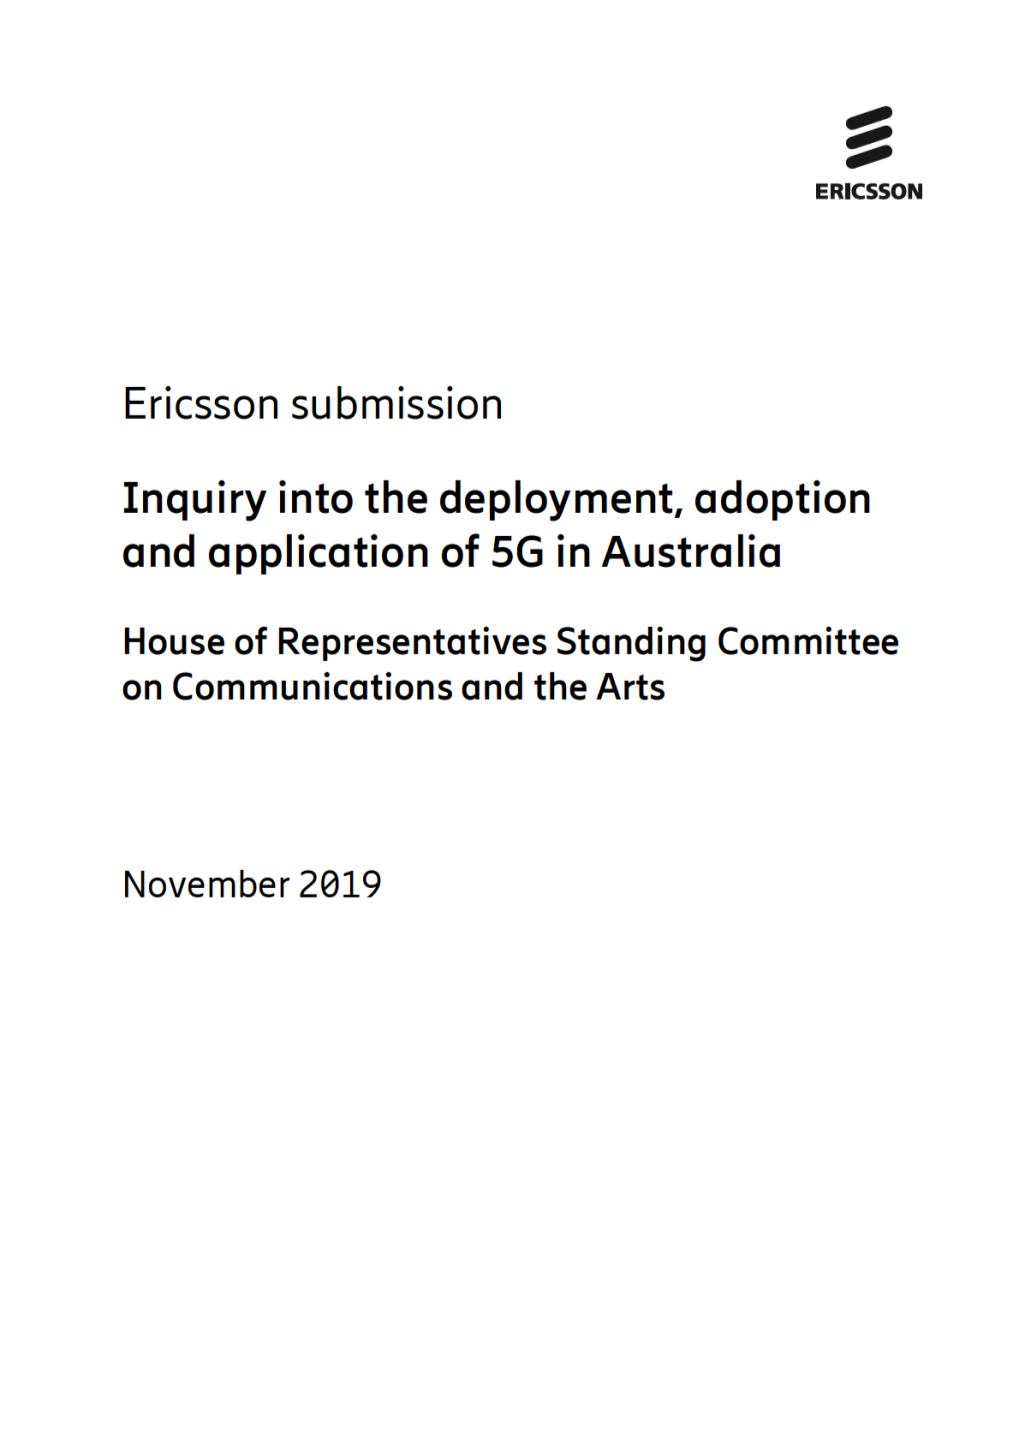 Inquiry Into the Deployment, Adoption and Application of 5G in Australia